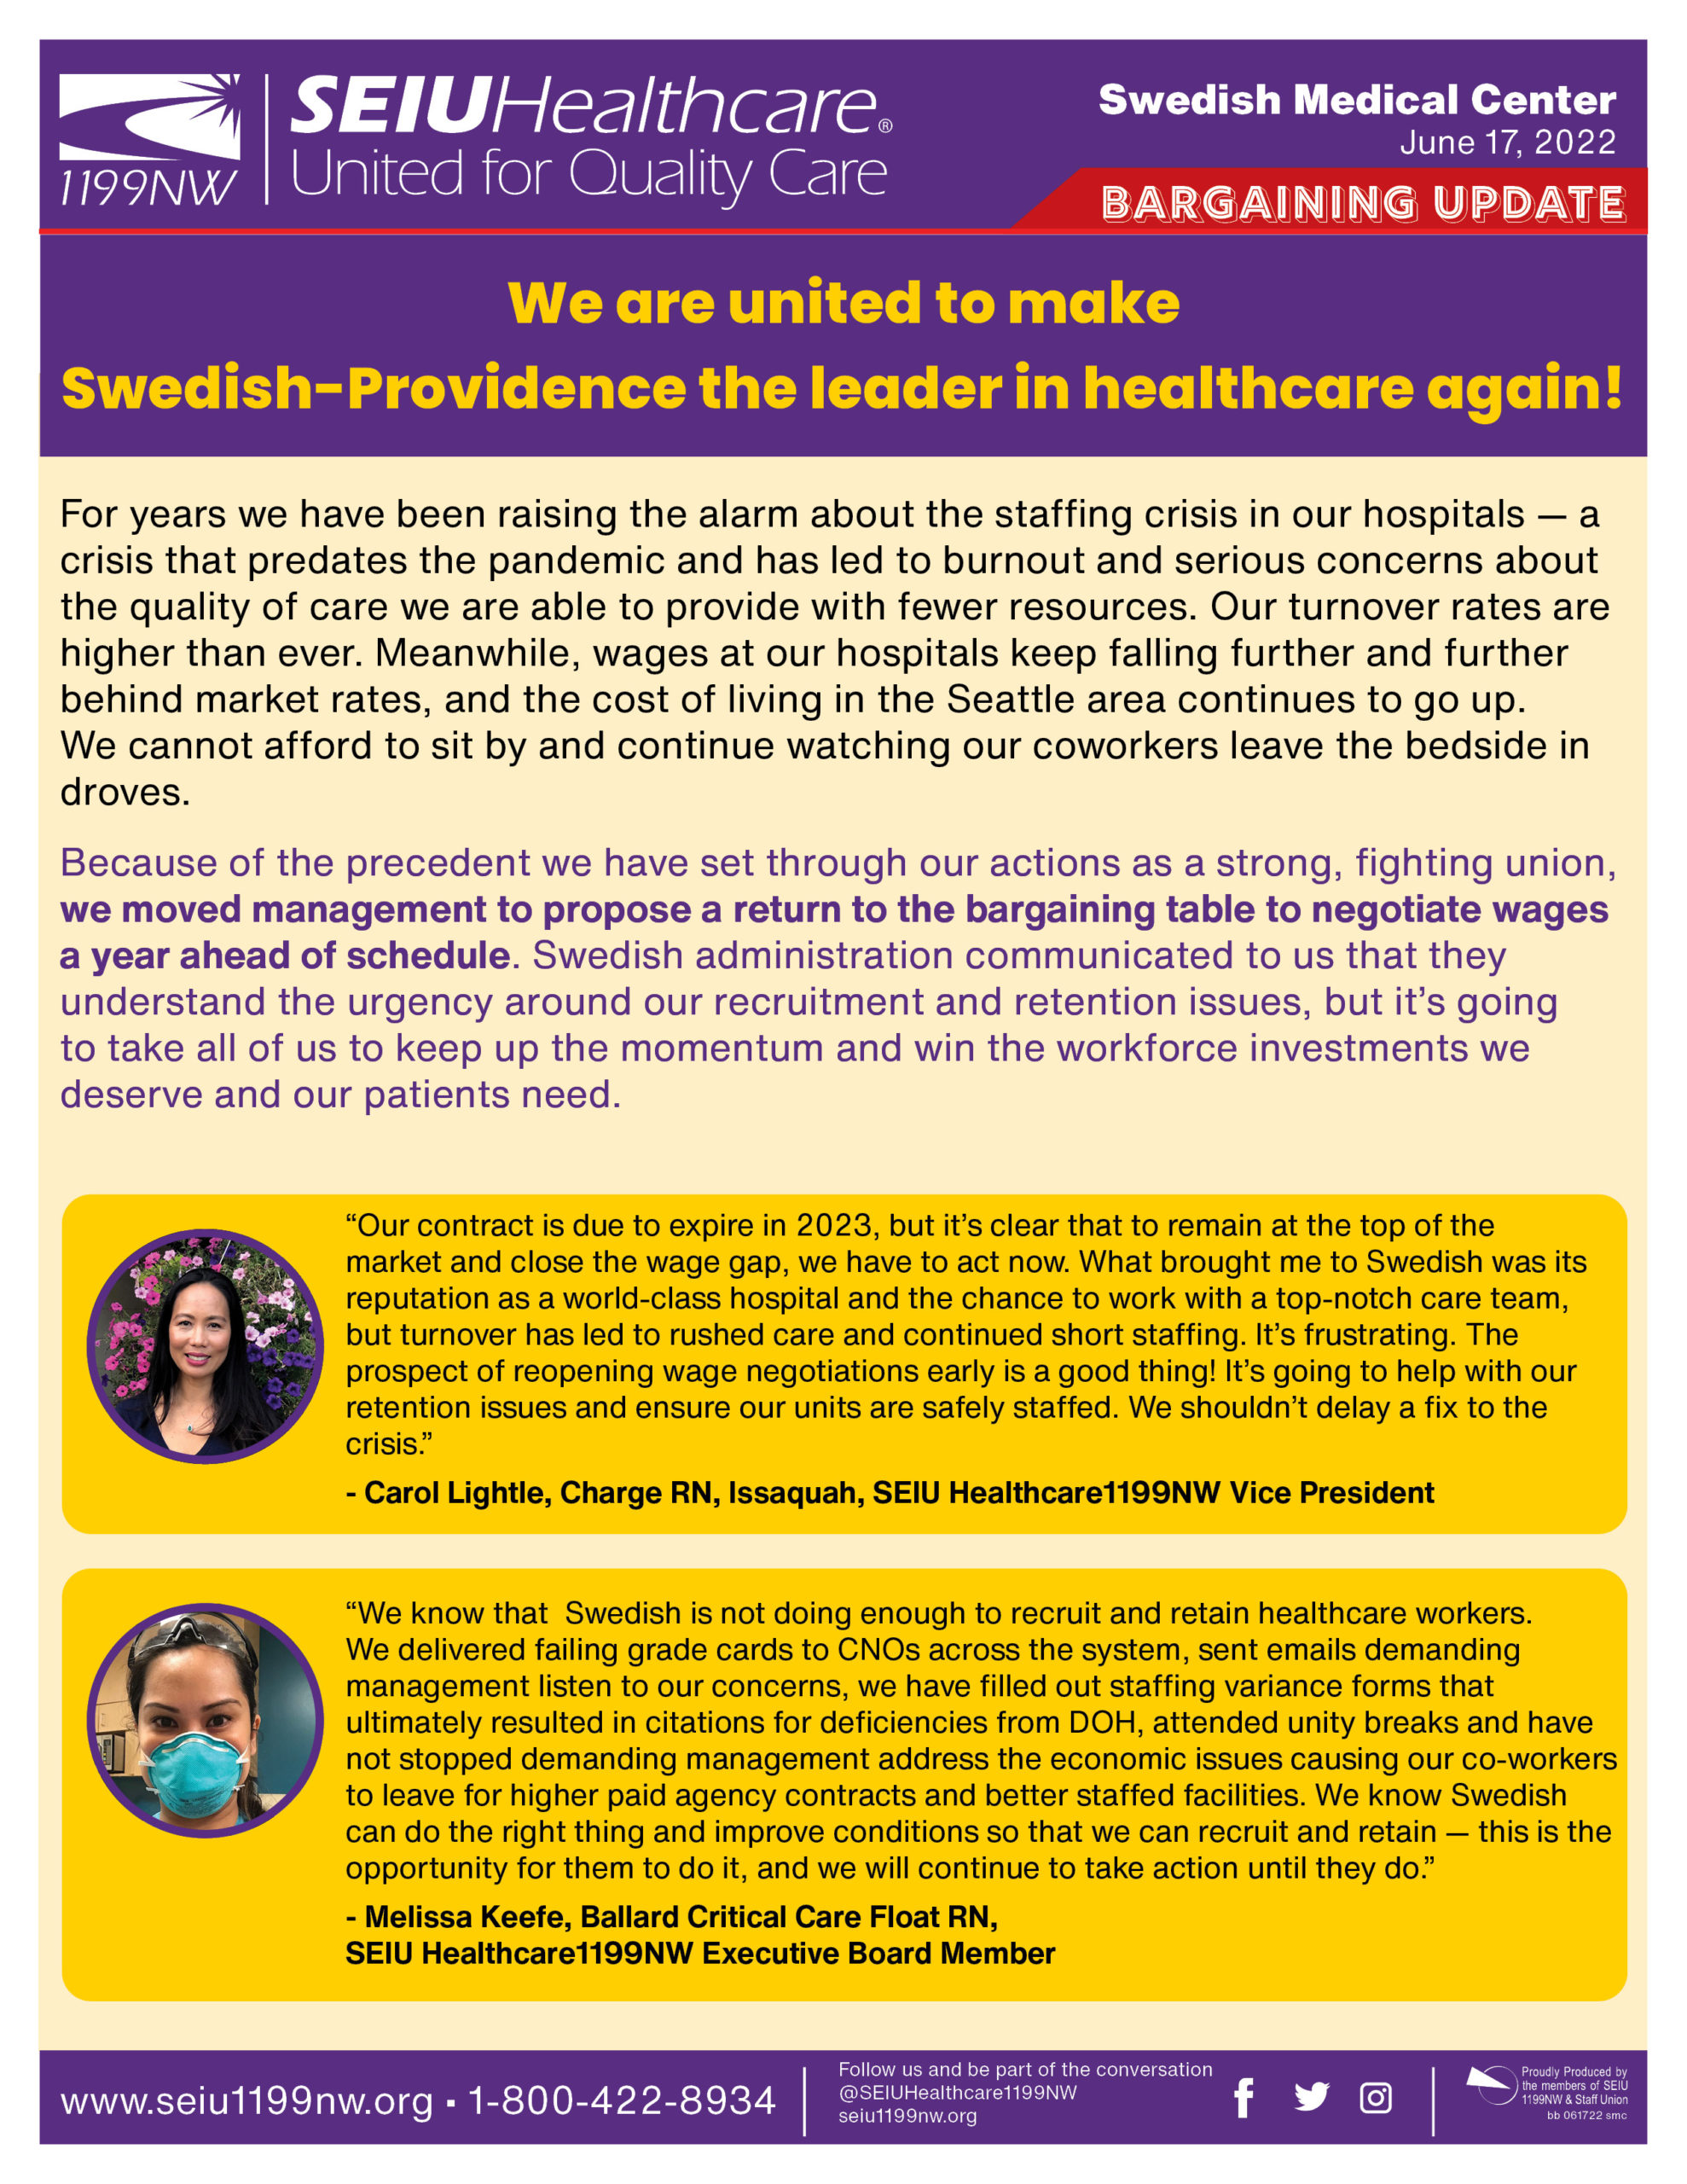 We are united to make Swedish-Providence the leader in healthcare again!